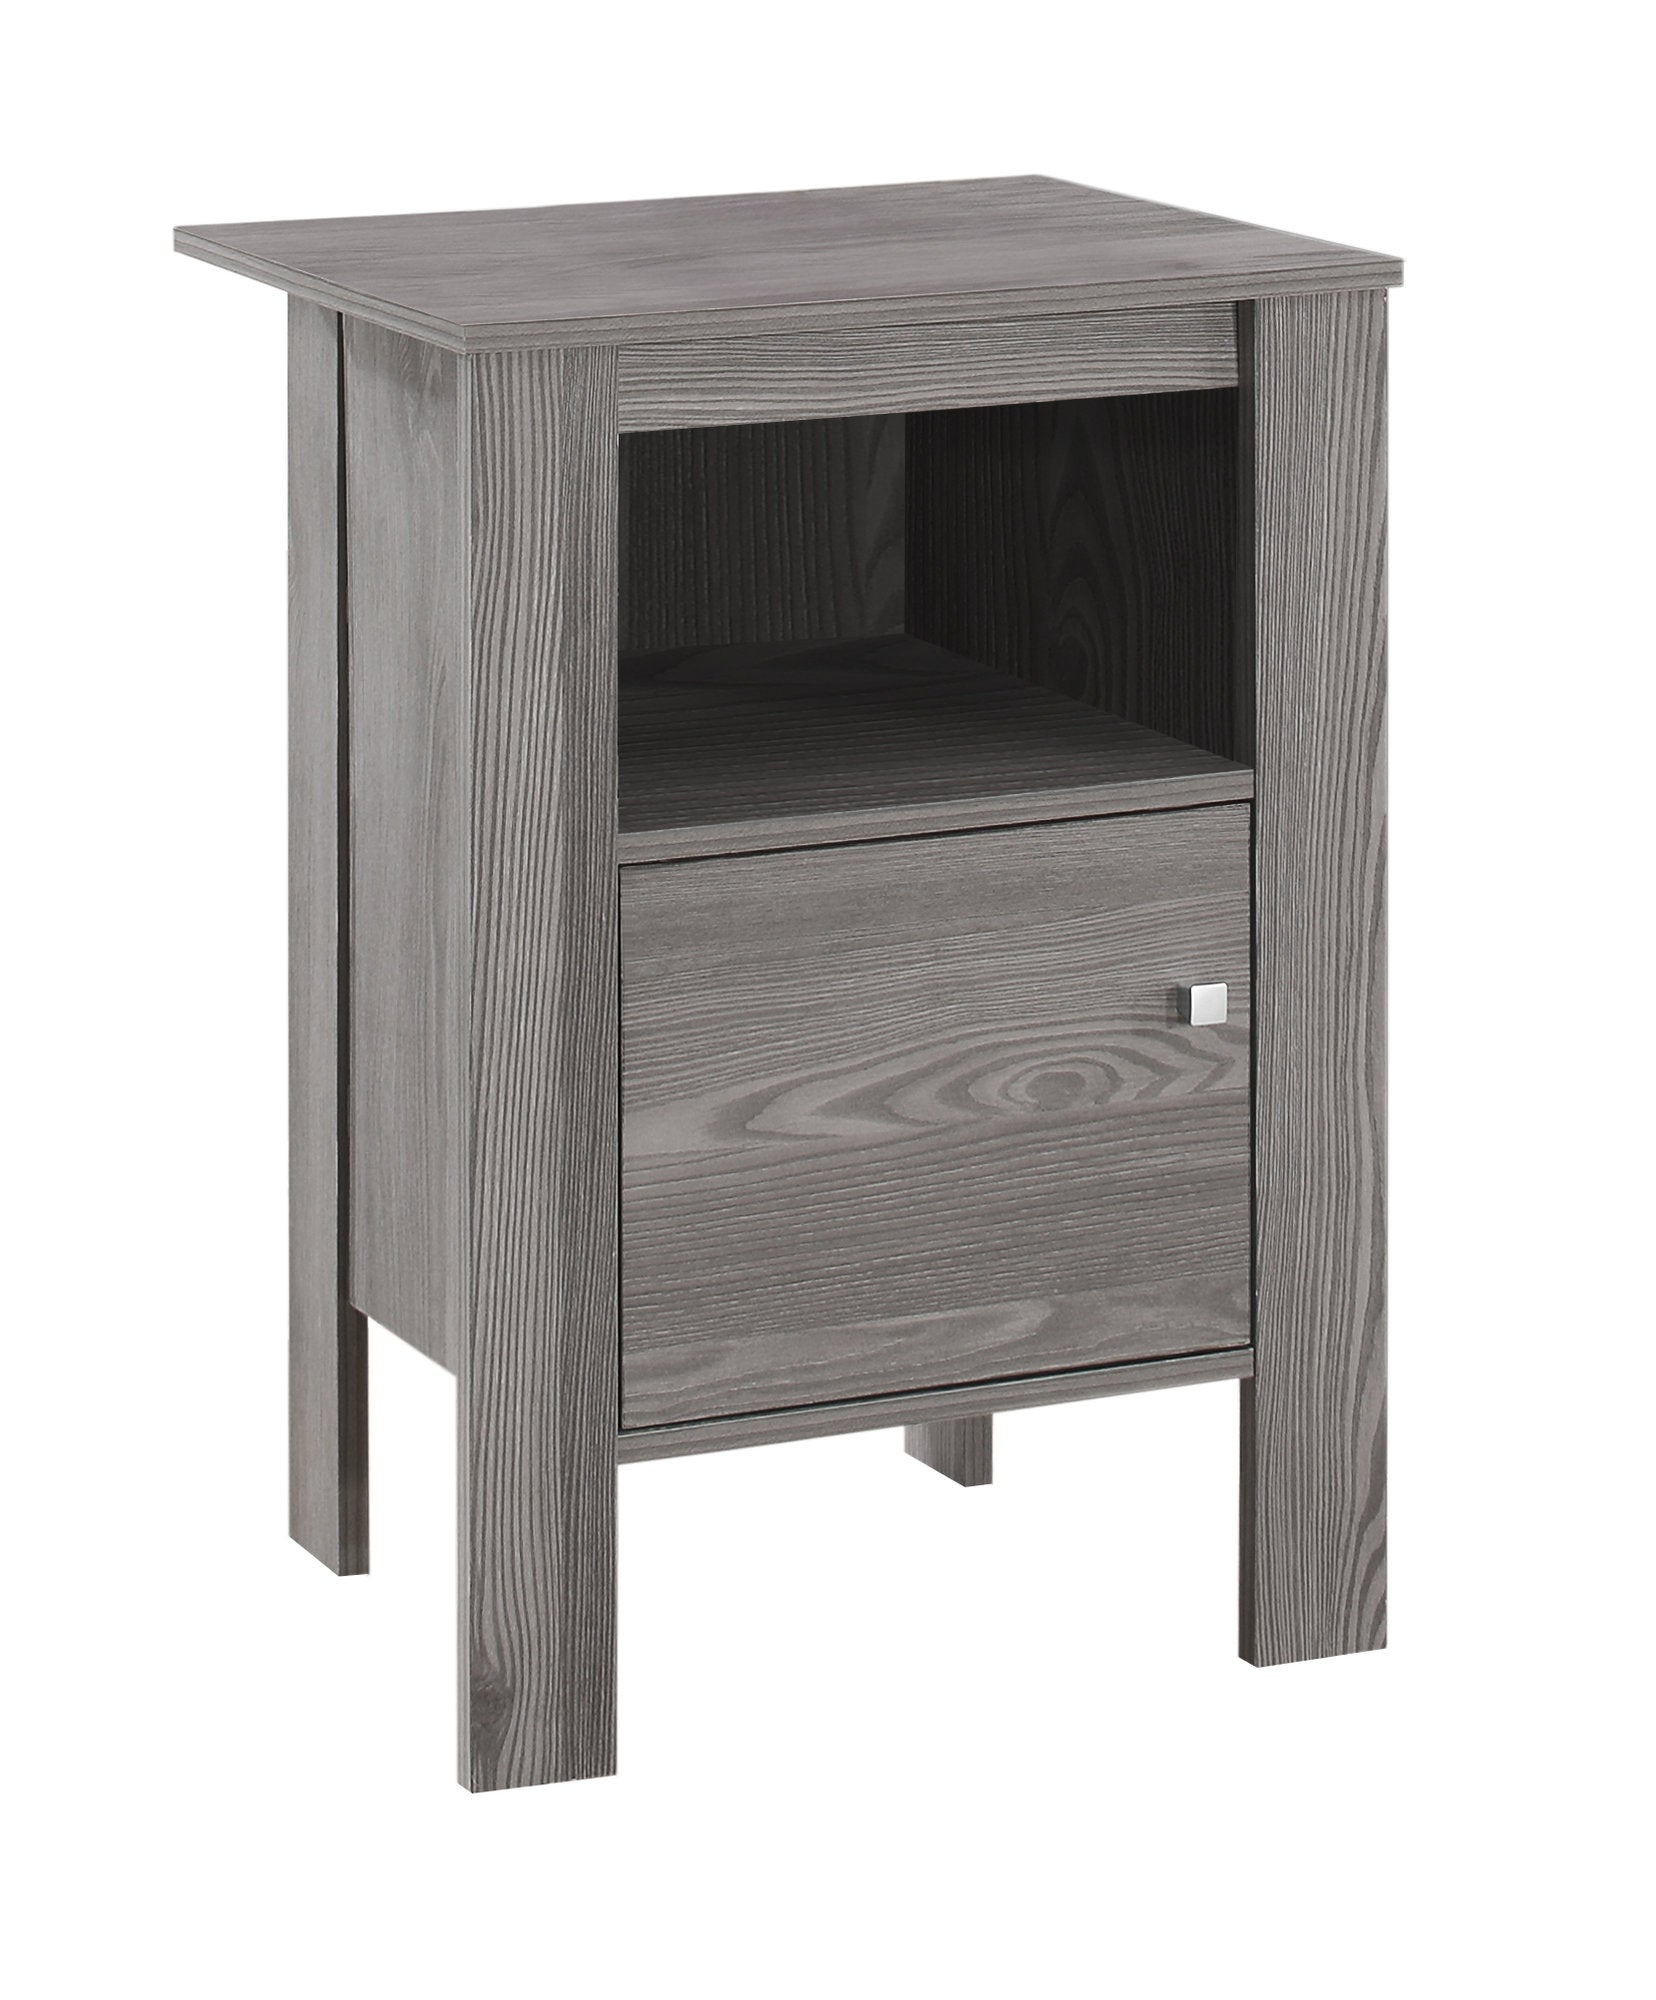 Accent Table-grey Night Stand With Storage, 17.25" L X 14" D X 24.25" H